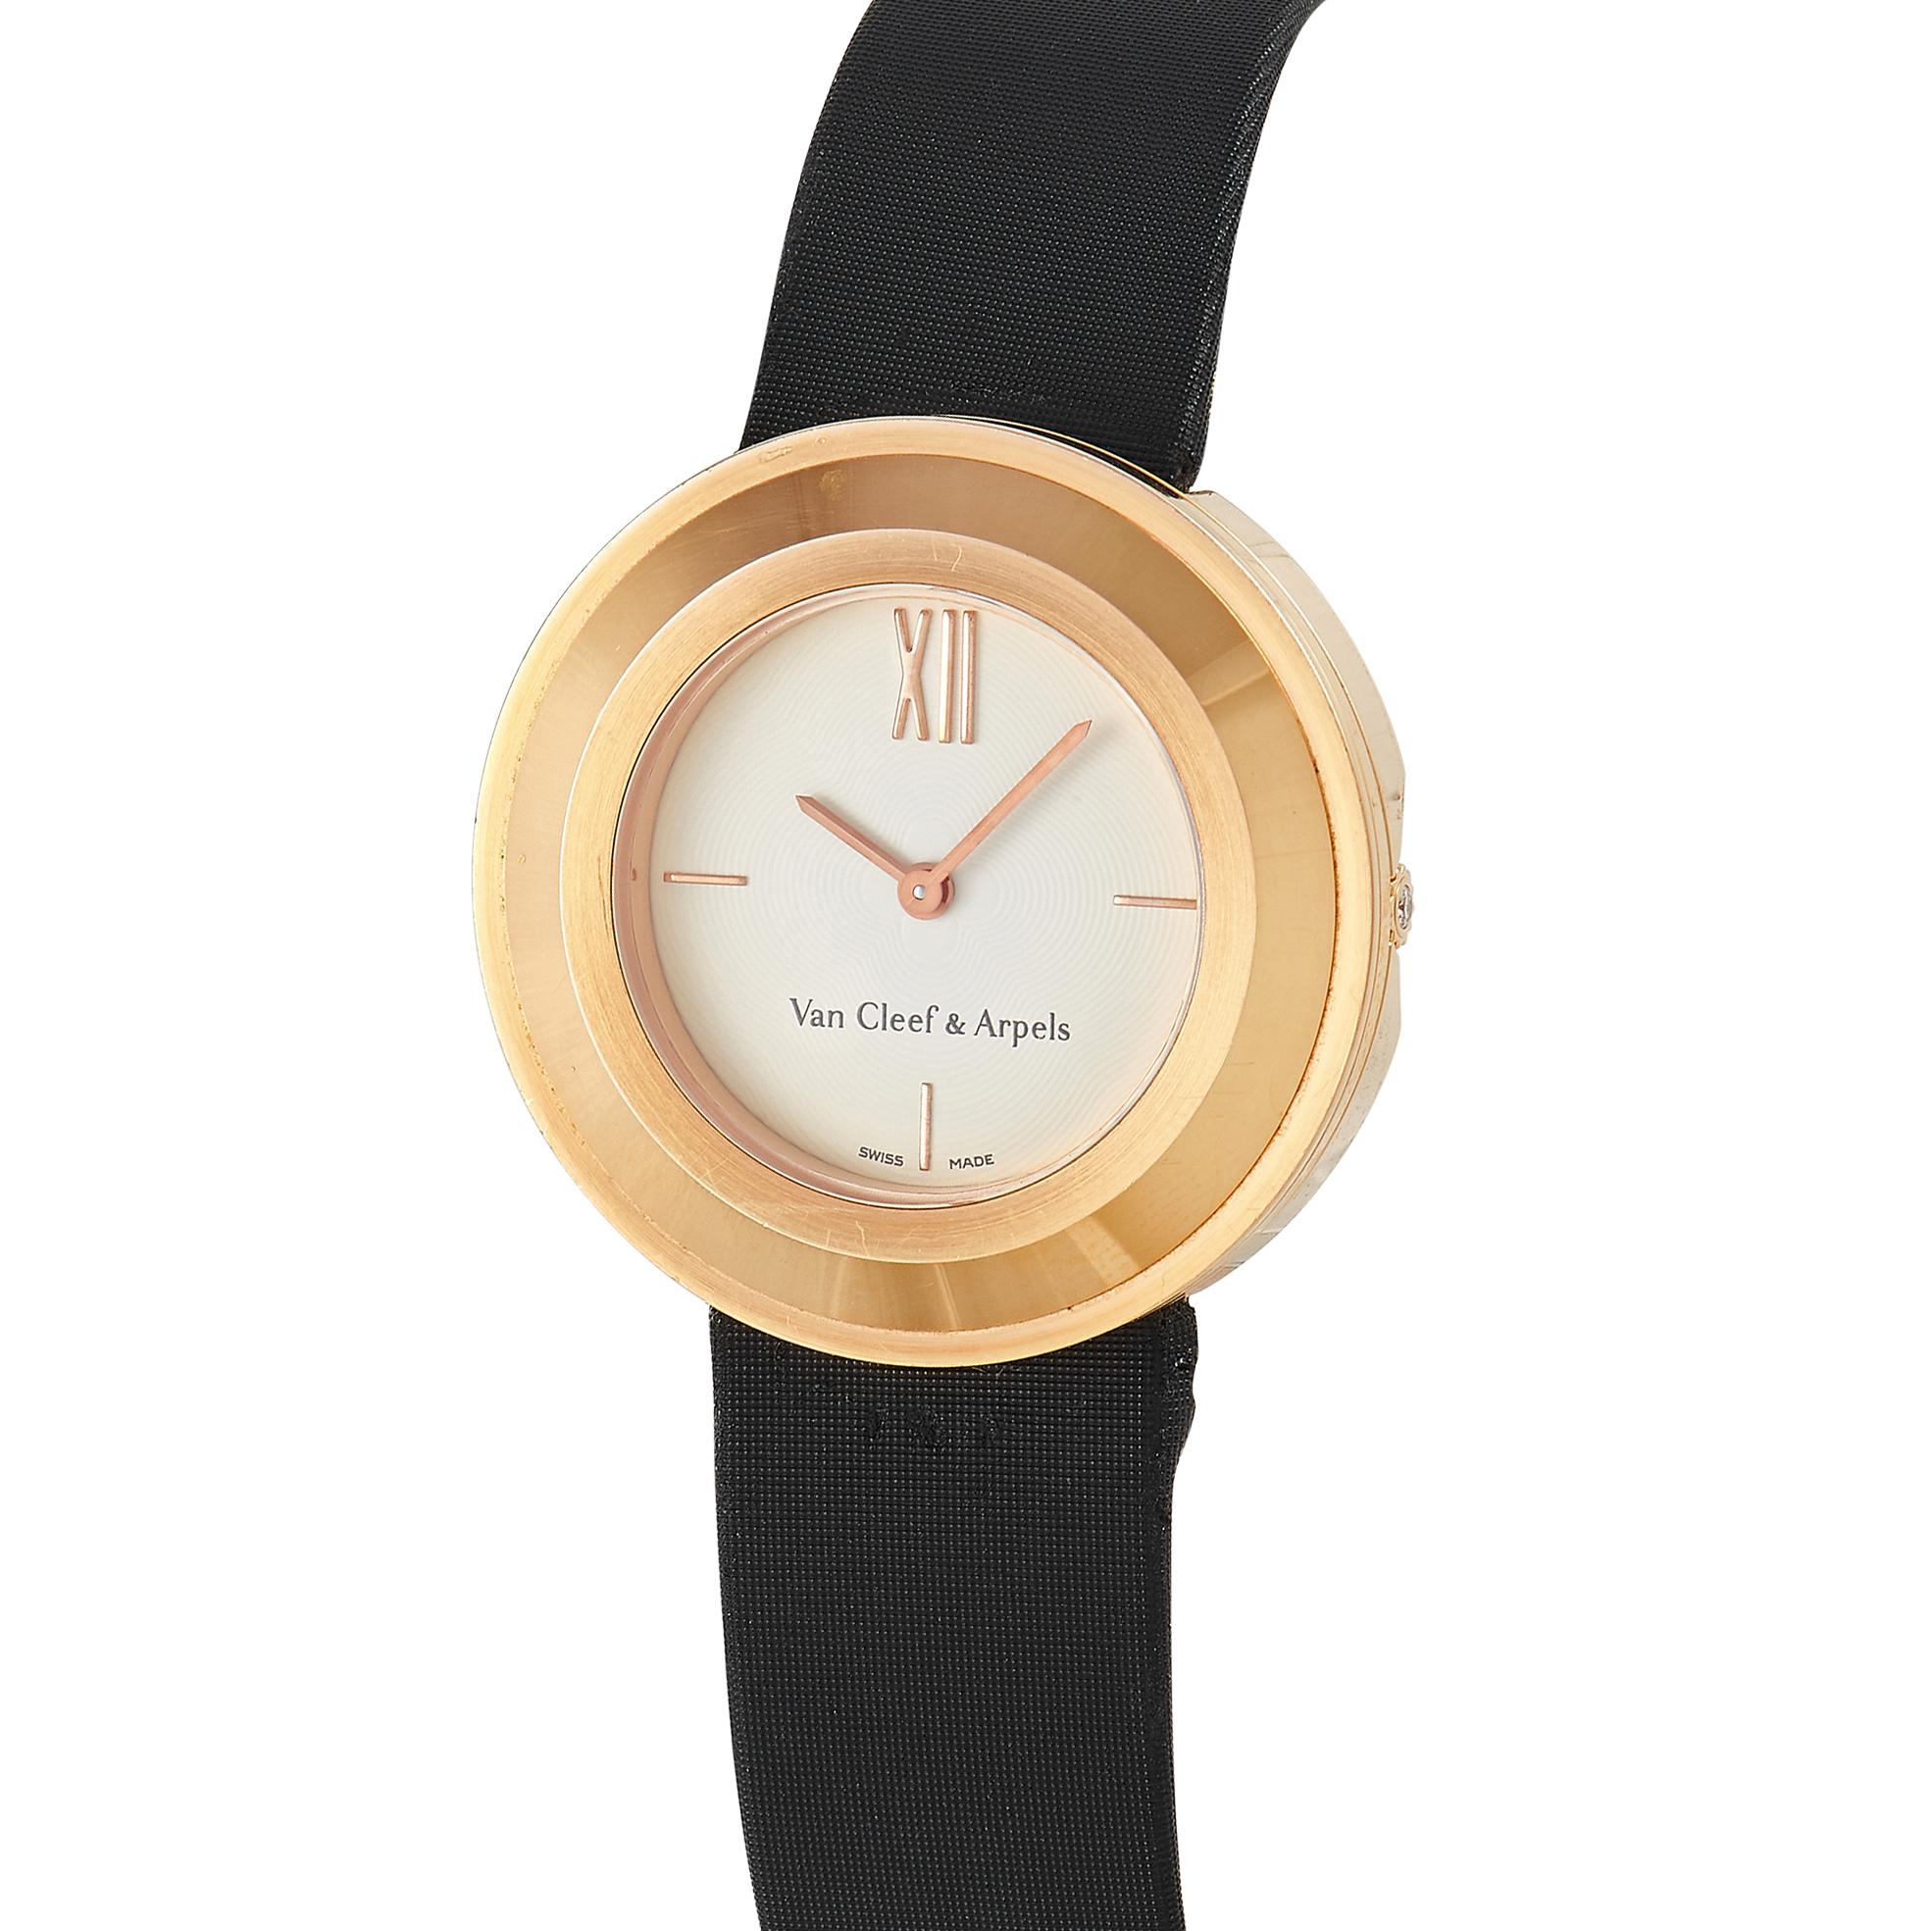 The Van Cleef & Arpels Charms Watch, reference number HH70728, is a subtle piece that will instantly make any ensemble more elegant.

This understated design pairs an opulent 25mm circular case crafted from 18K Rose Gold with a black satin watch